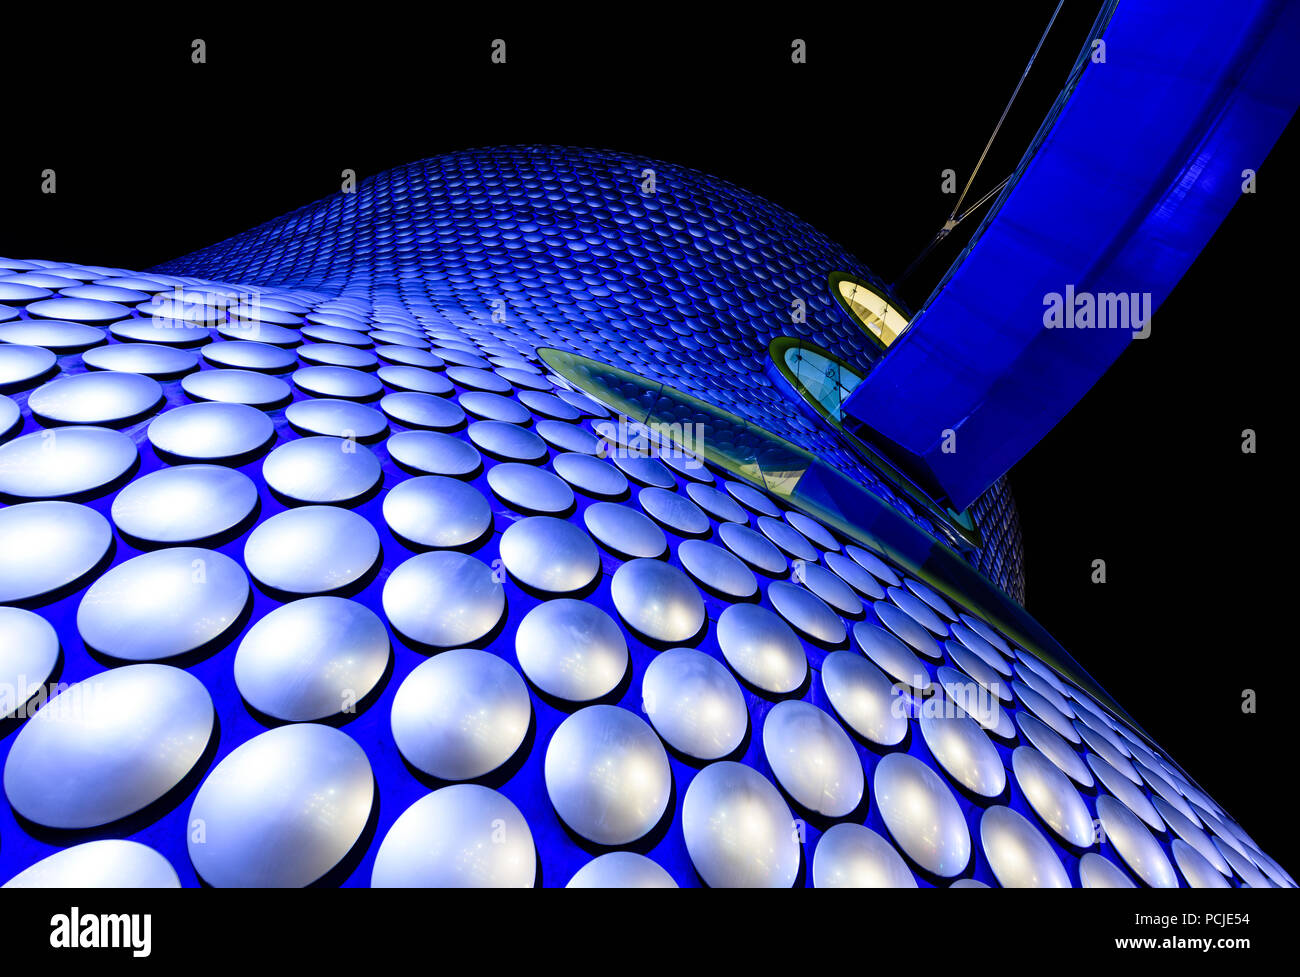 Looking up at the Selfridges building in Birmingham lit up with blue light at night and resembling a dalek from Dr Who Stock Photo